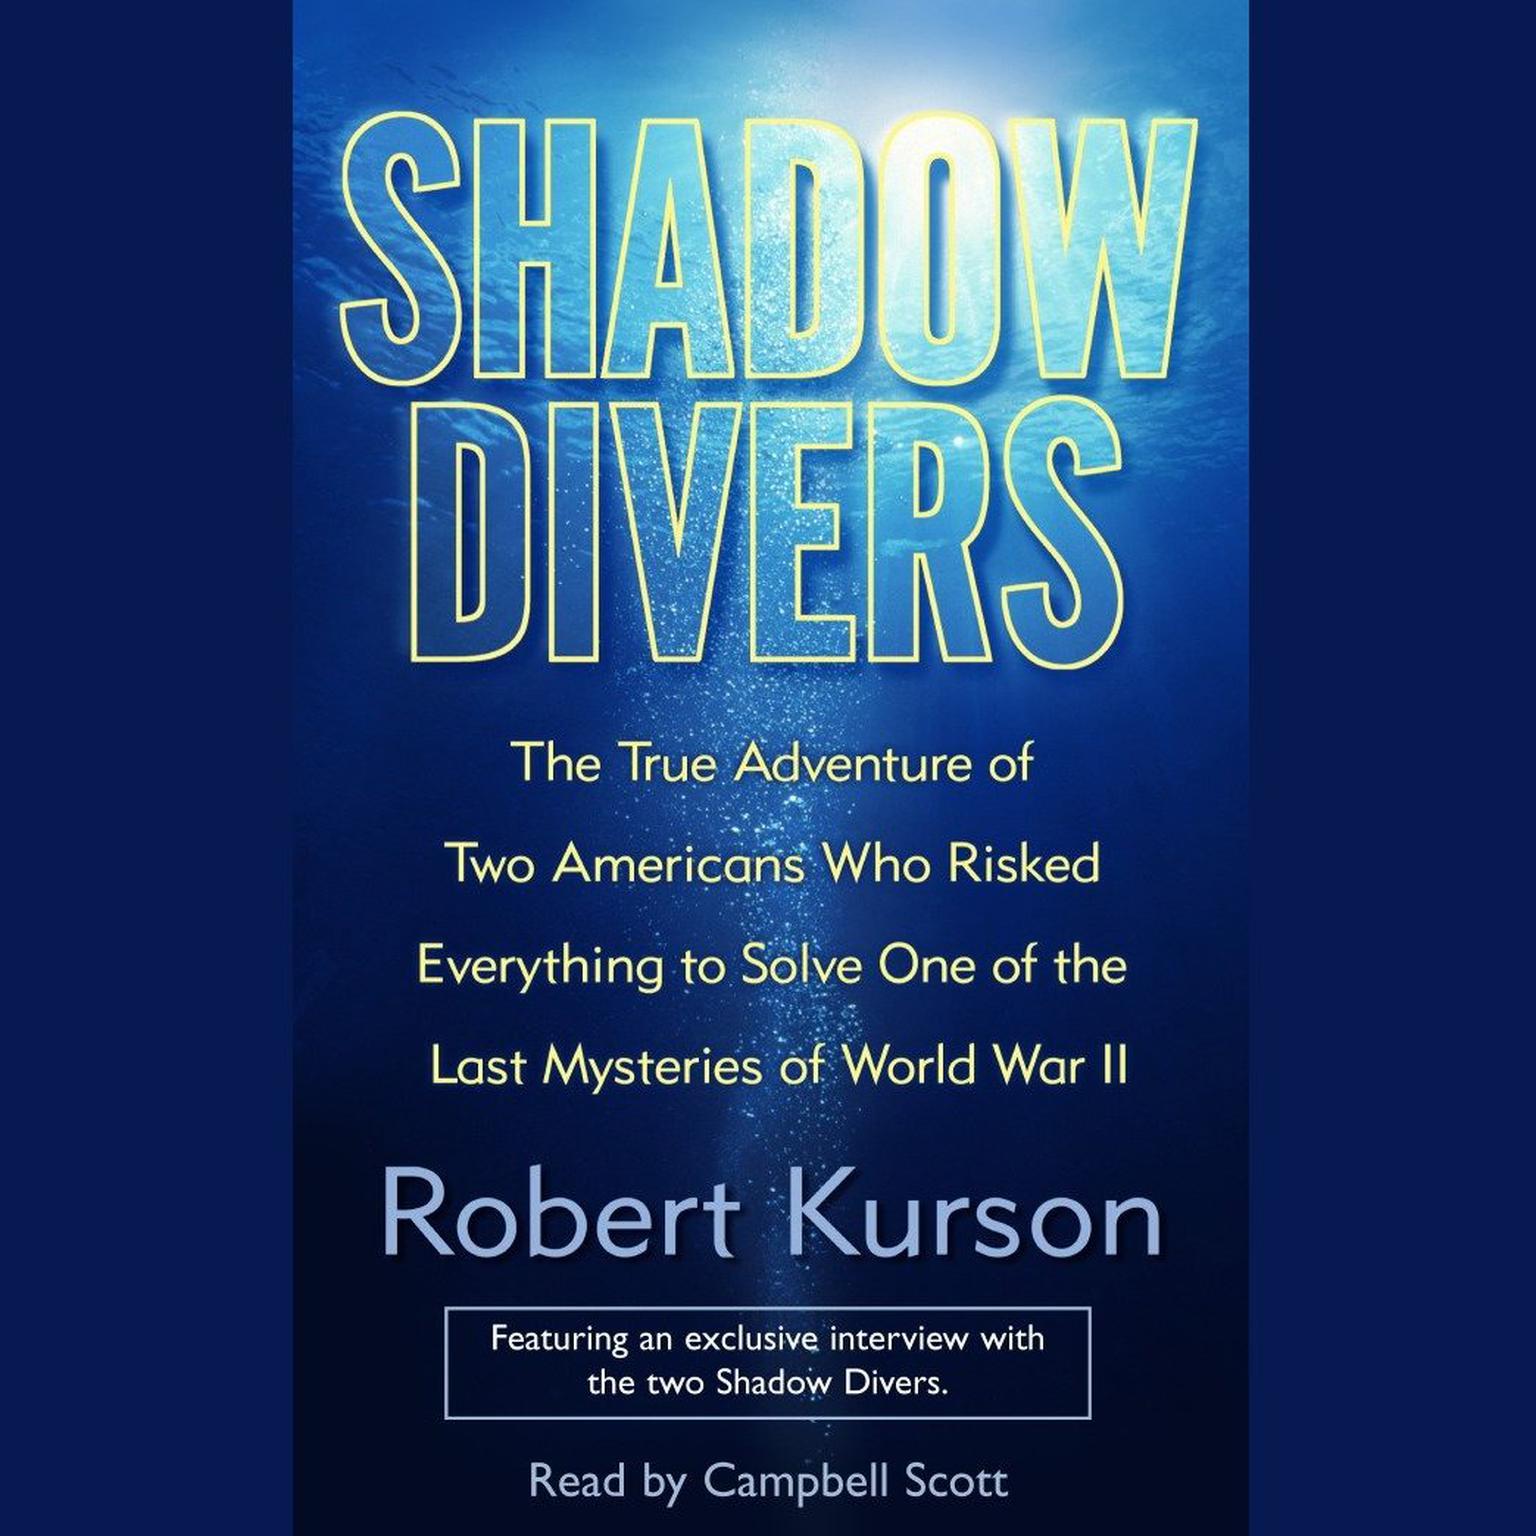 Shadow Divers (Abridged): The True Adventure of Two Americans Who Risked Everything to Solve One of the Last Mysteries of World War II Audiobook, by Robert Kurson